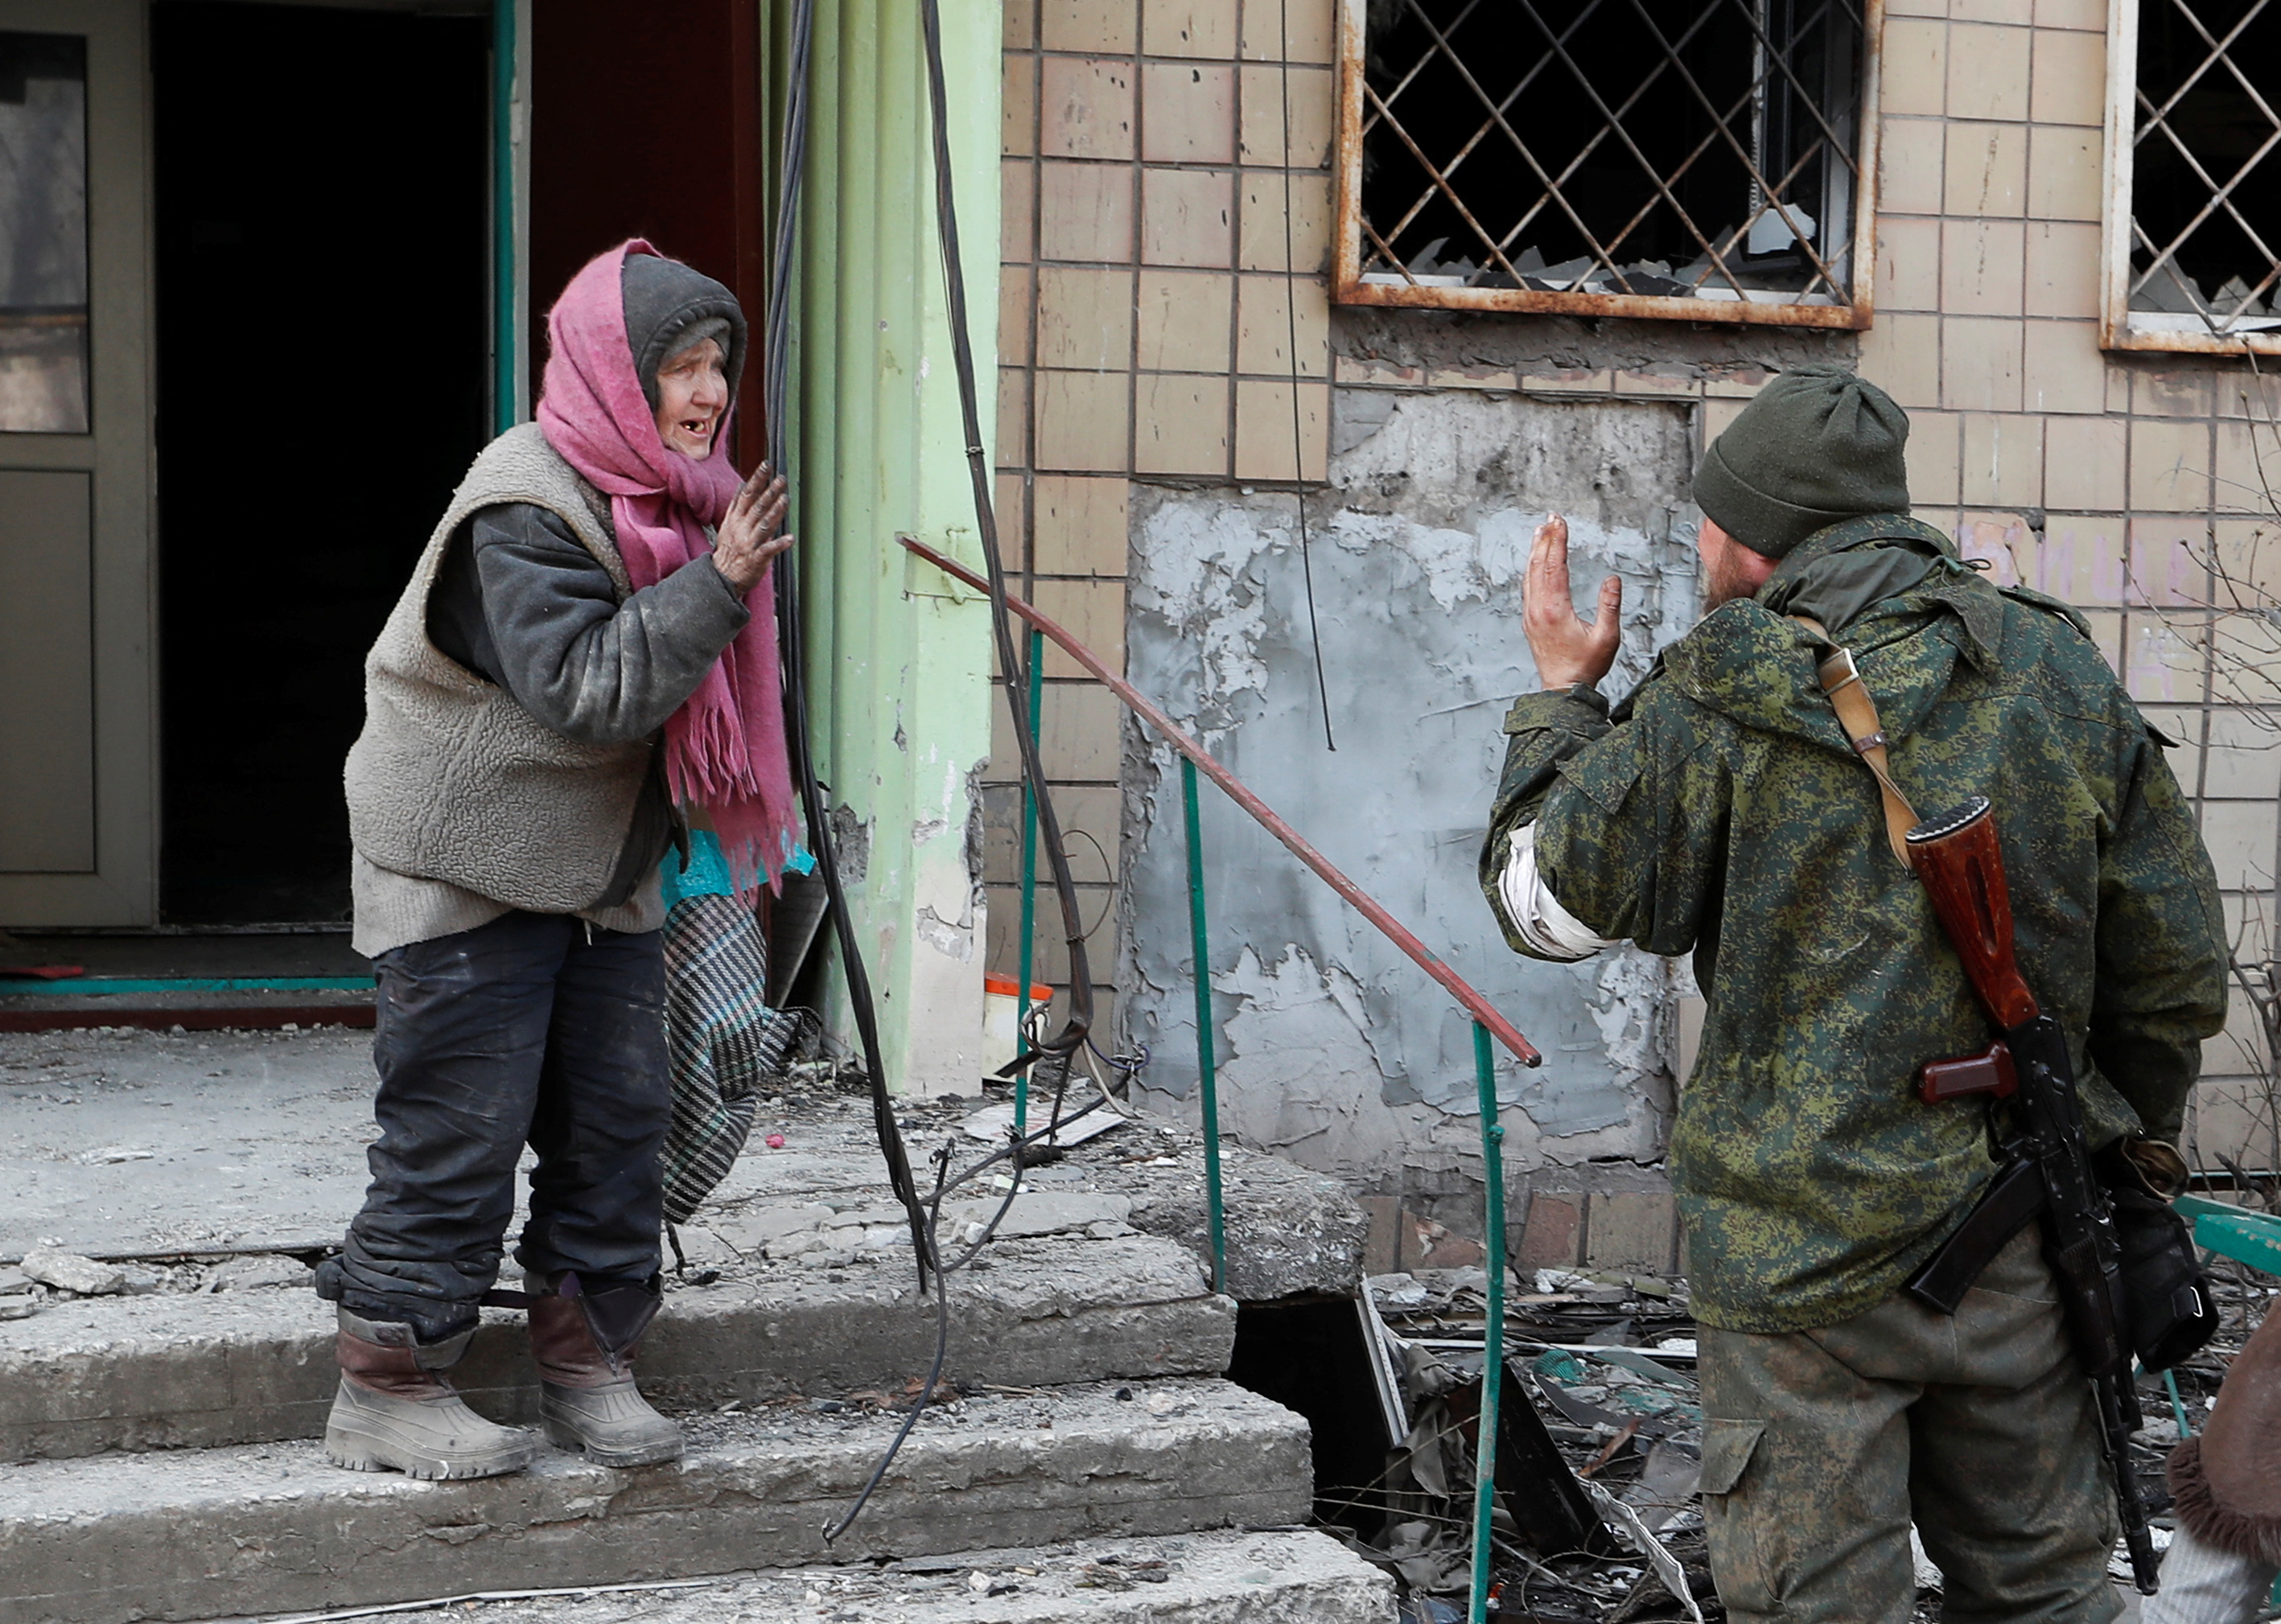 A local resident speaks to a service member of pro-Russian troops outside a damaged apartment building in Mariupol